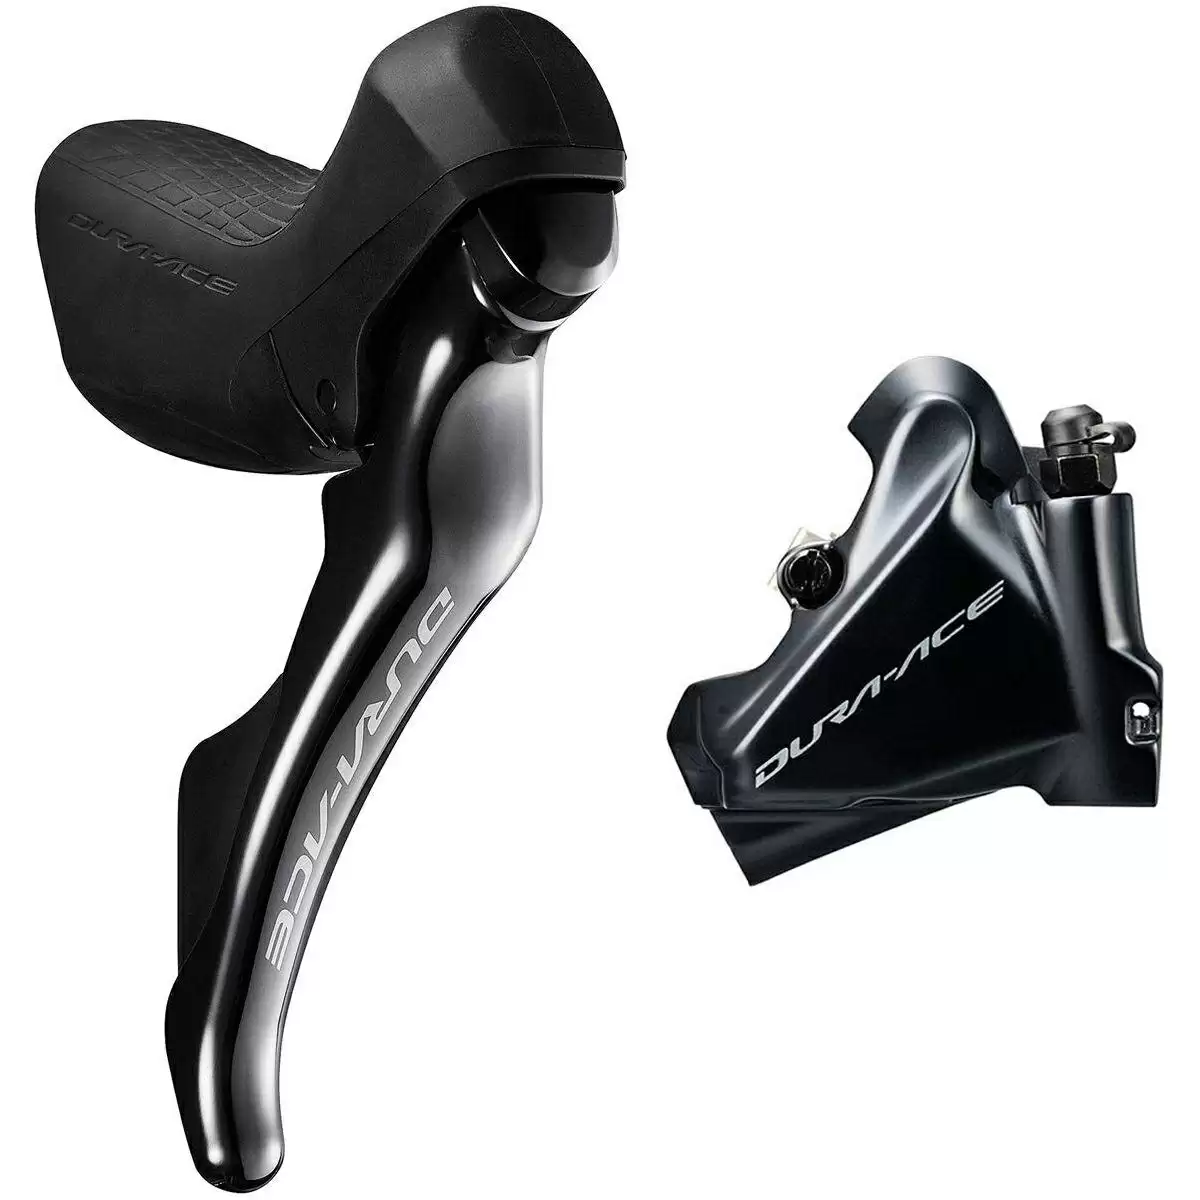 Hydraulic front shift lever Dura Ace ST-R9120 + BR-R9170 2x - image